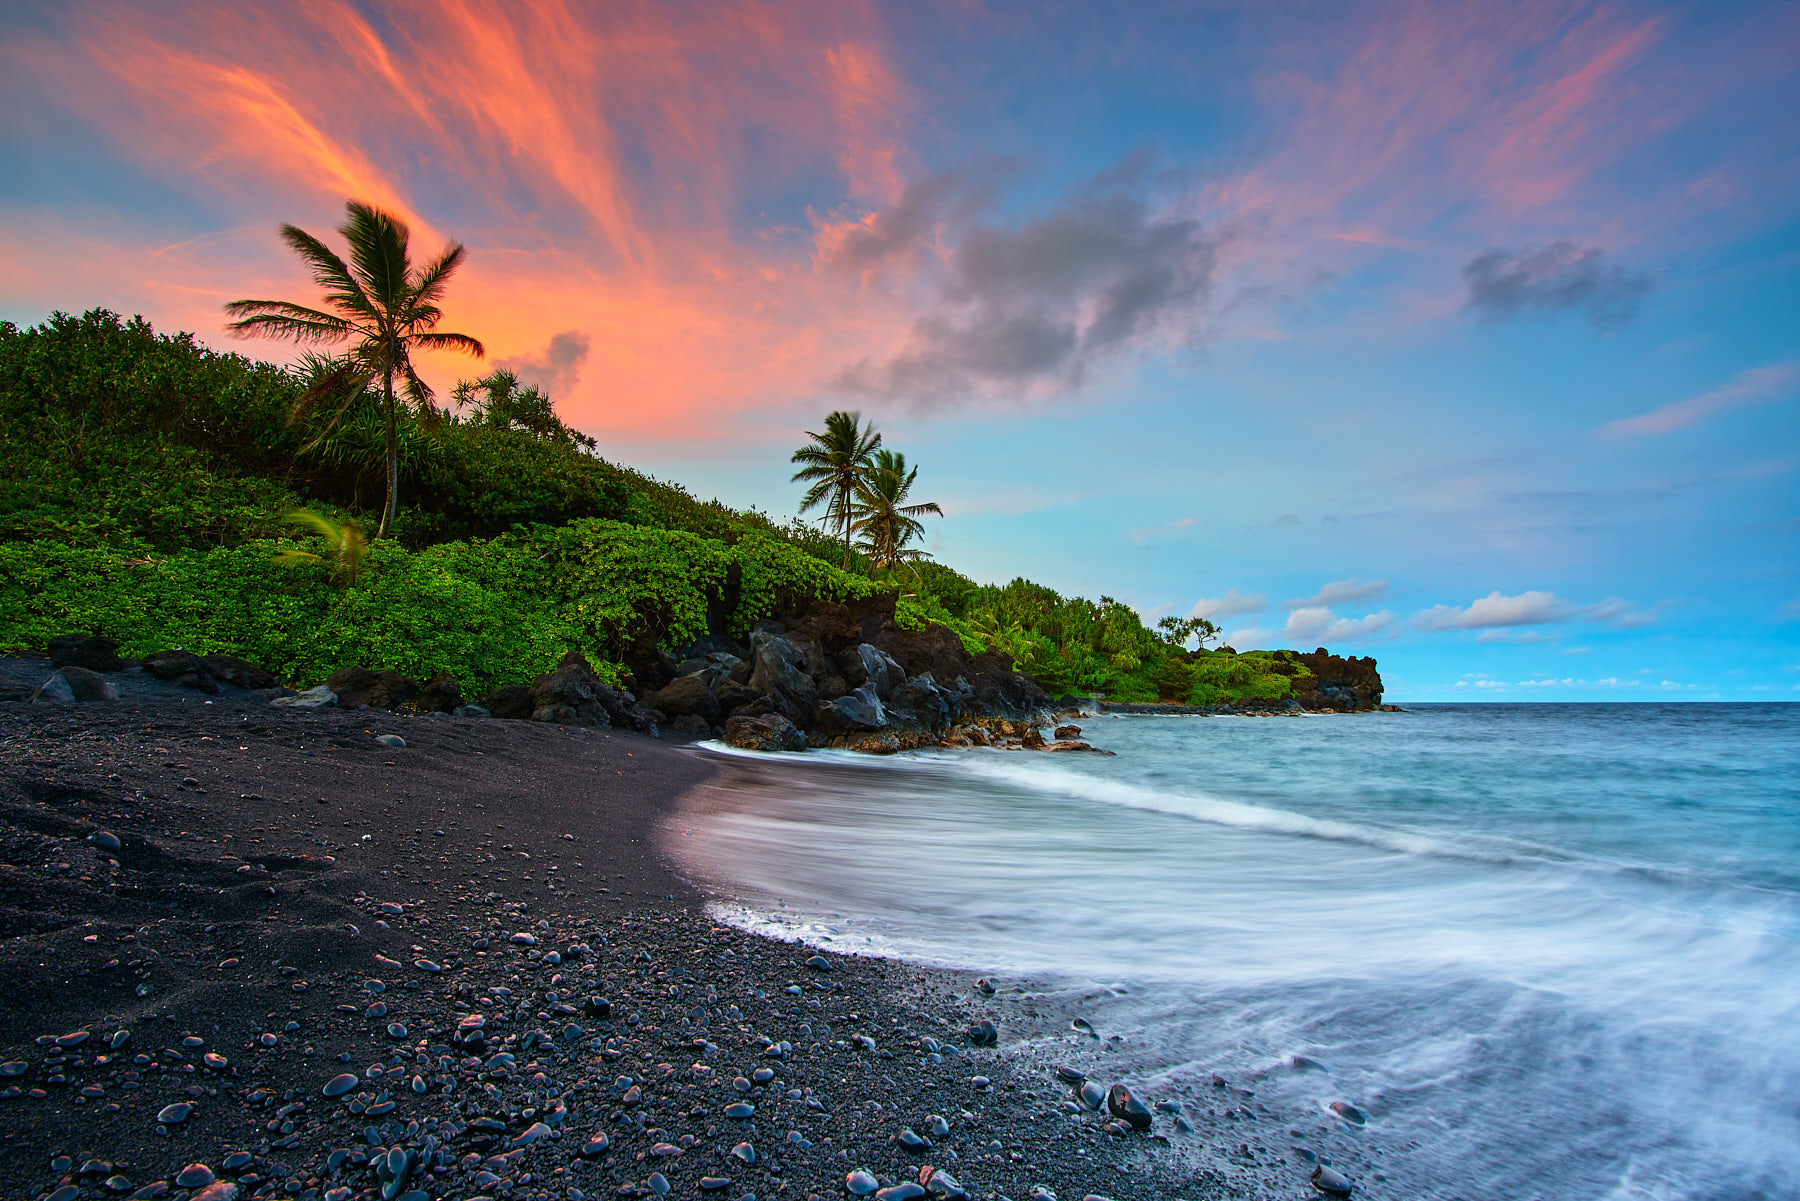 A glorious sunset at the black sand beach of Waianapanapa State Park in Hana, Hawaii.   Incoming wave crashes on to the beach